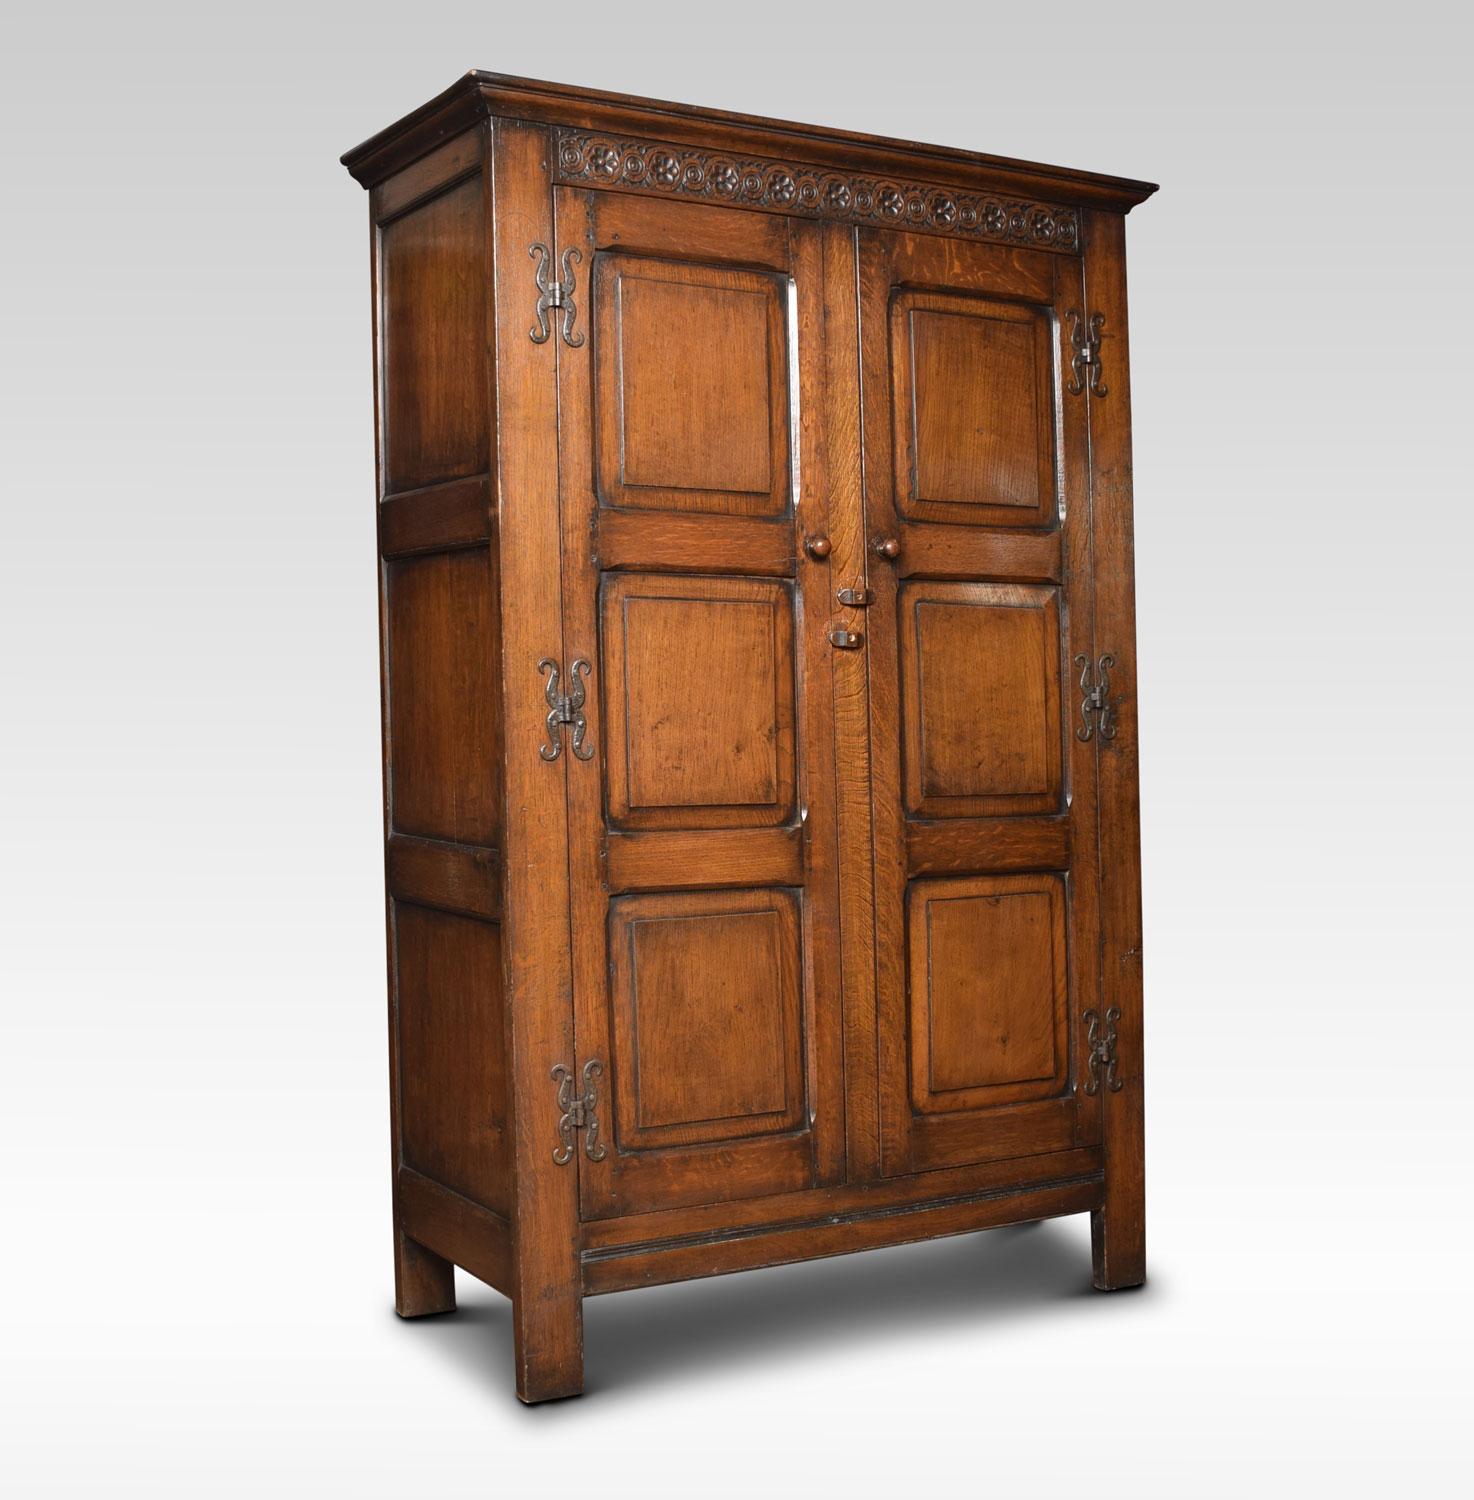 Large solid oak two-door wardrobe, the moulded cornice above linen fold decoration in the Jacobean style. The large panelled doors opening to reveal storage and hanging area, raised up on bracket feet
Dimensions
Height 73 inches
Width 49